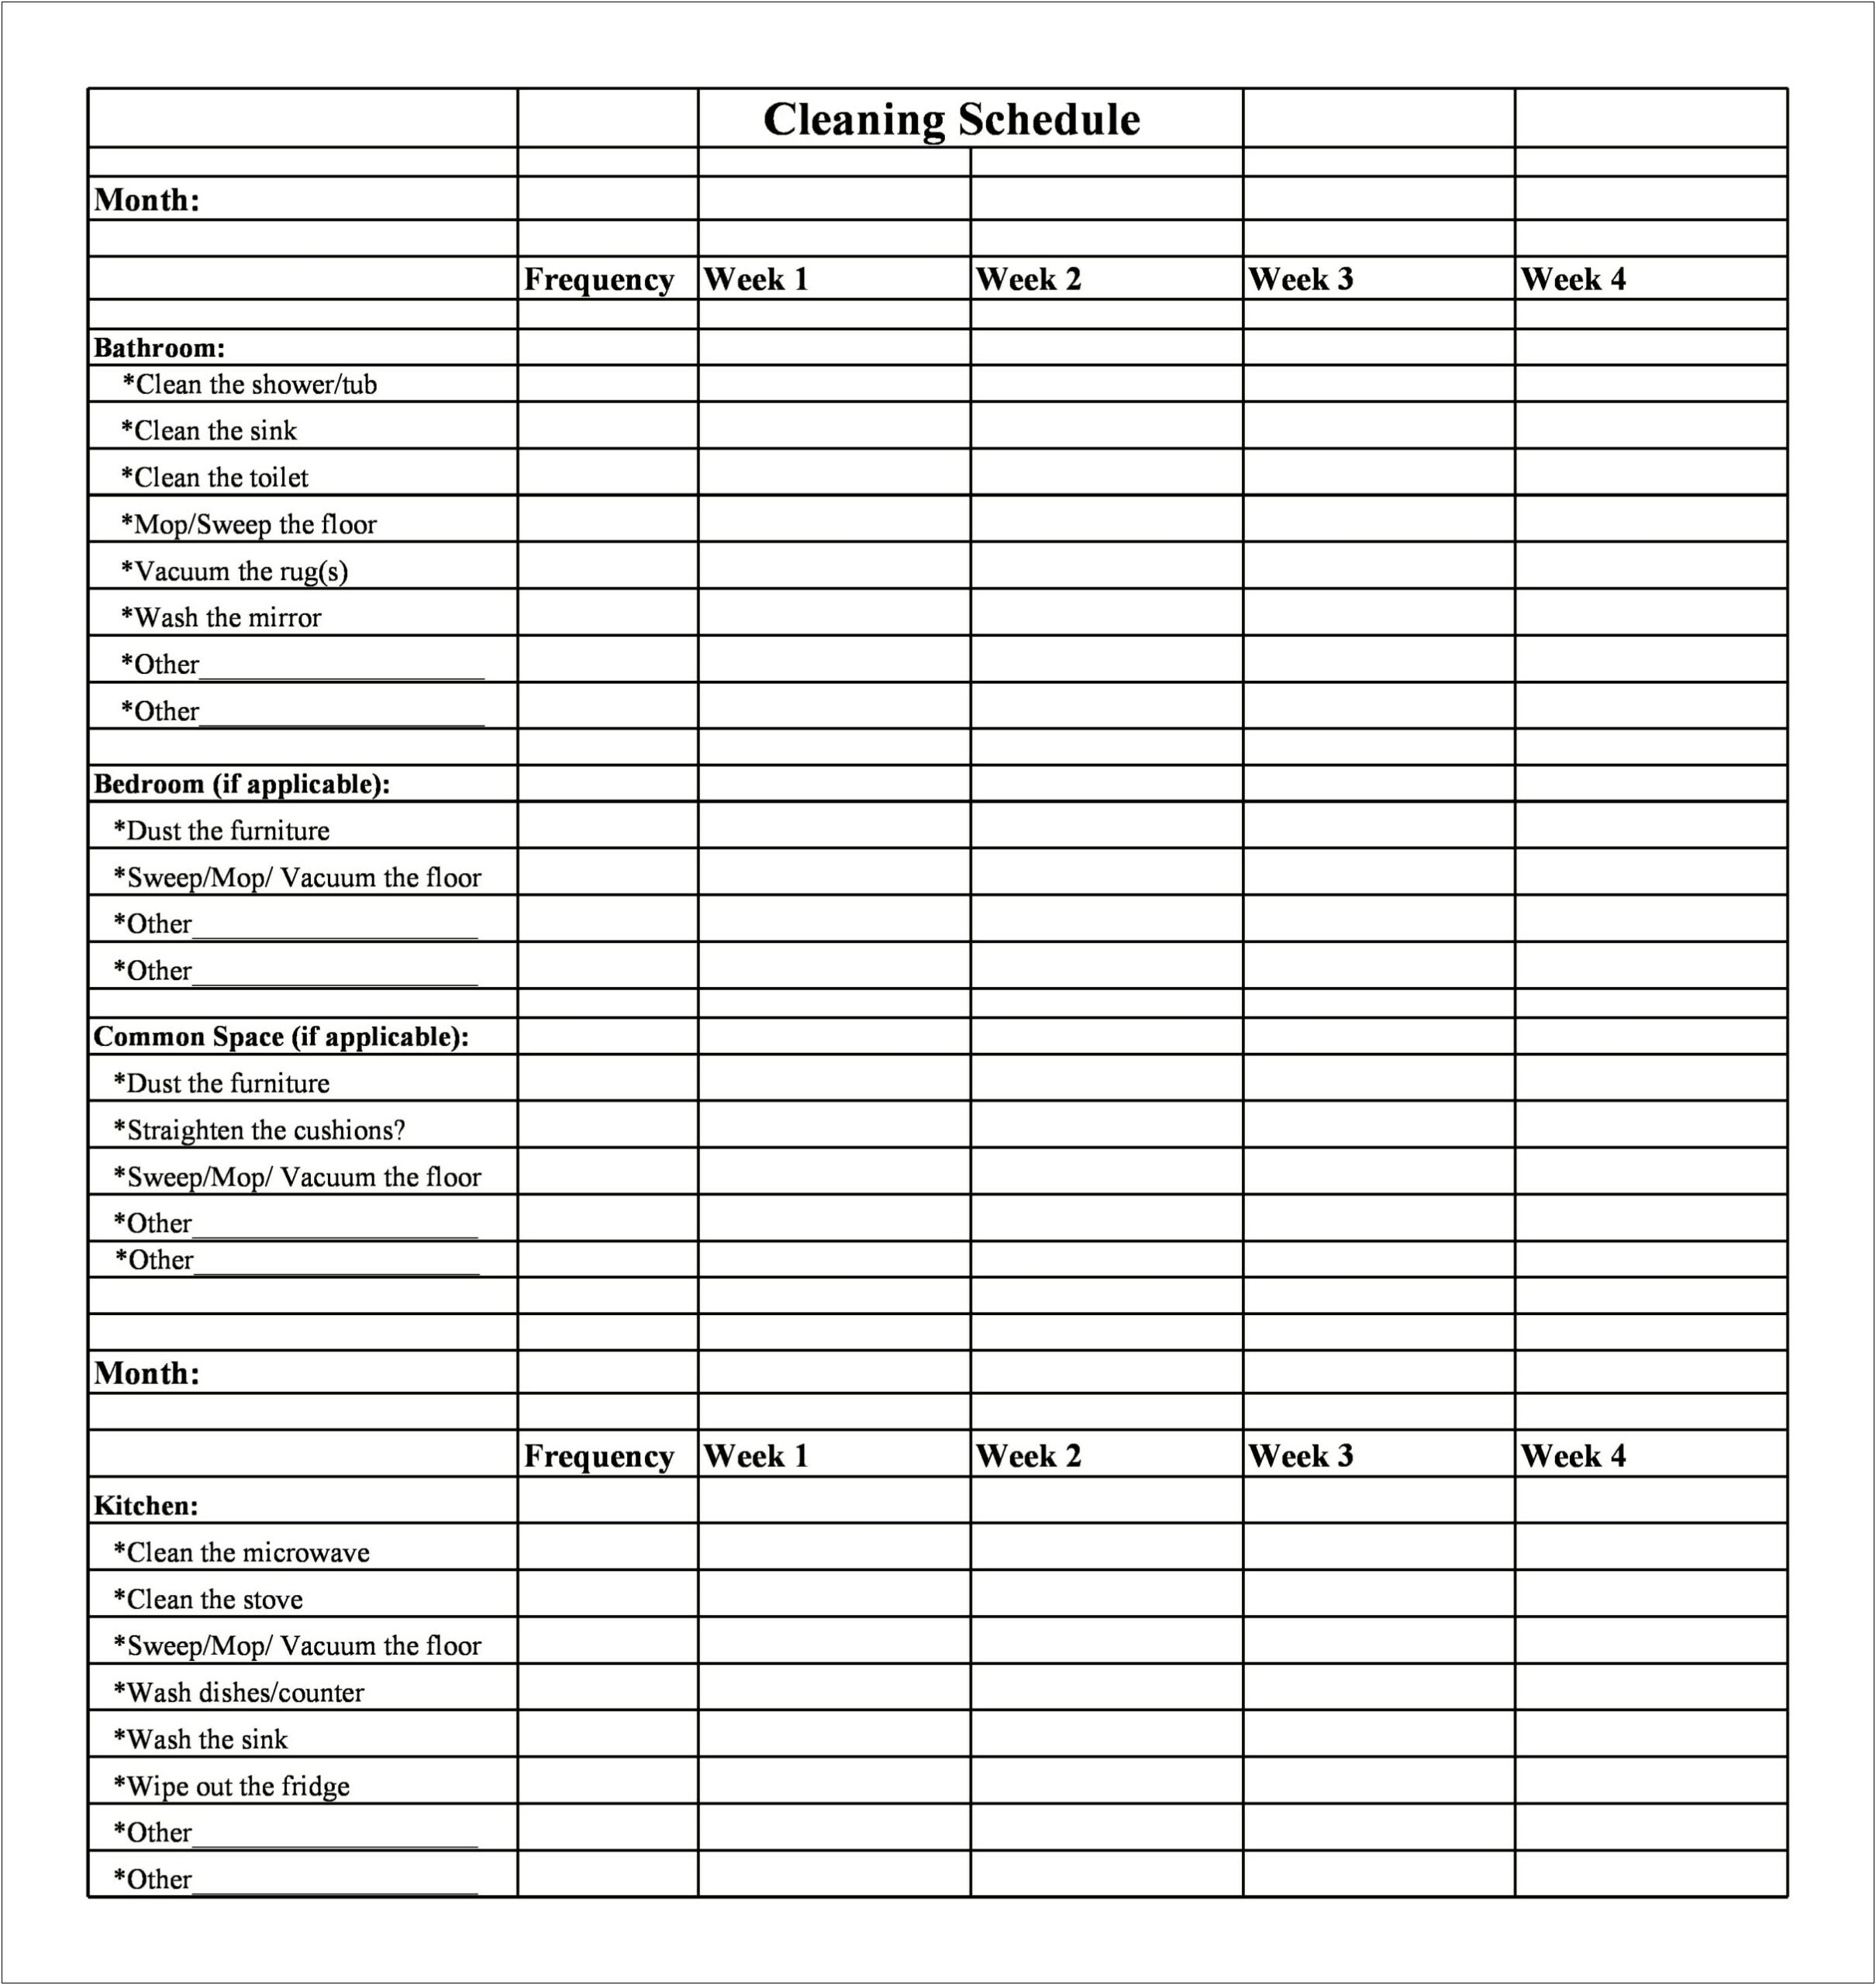 Cleaning Checklist By Room Free Template